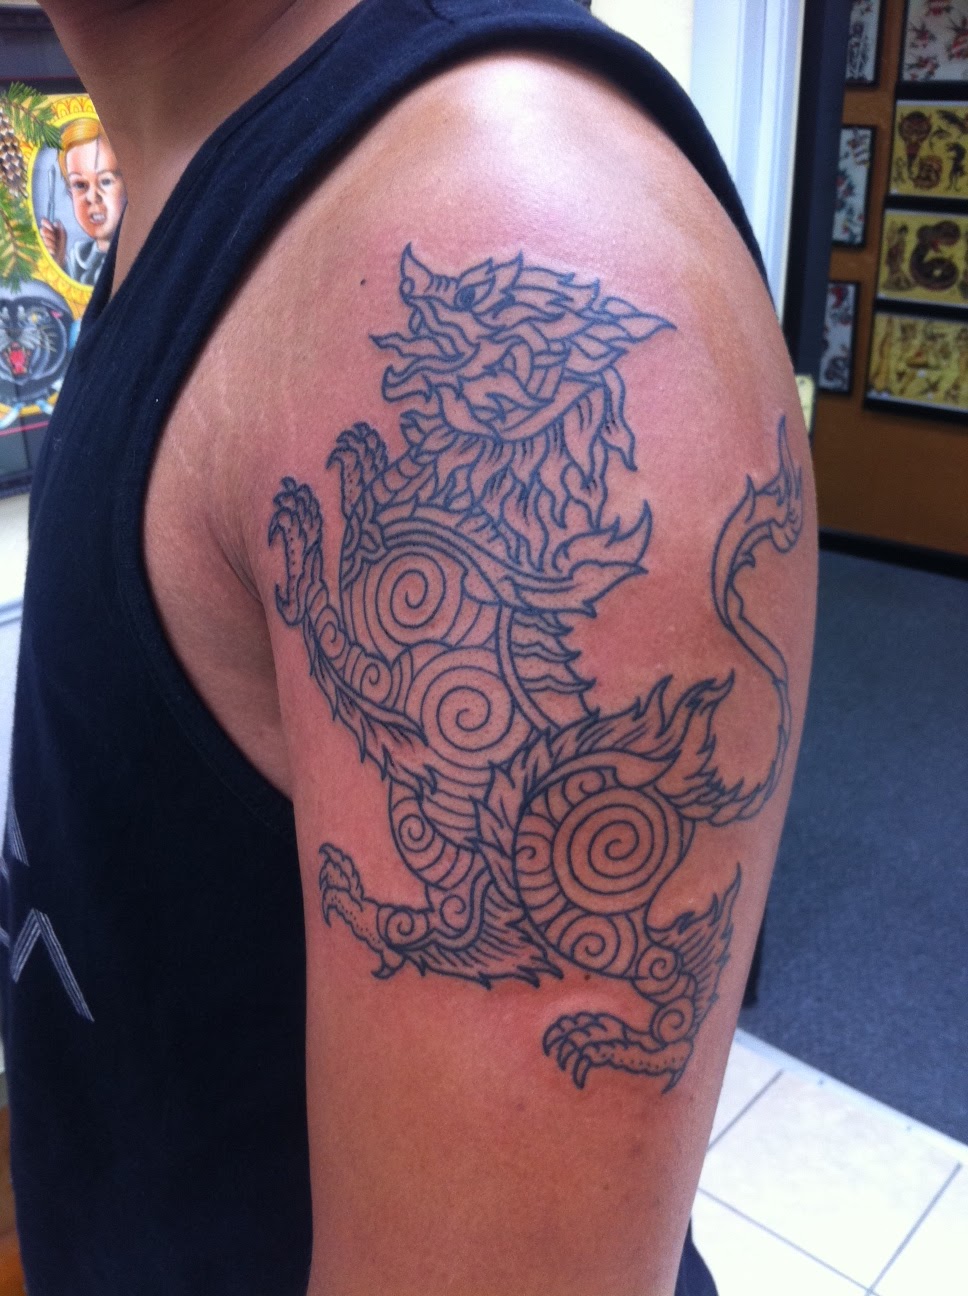 Voodoo Tattoo | By Appointment. We have availability, Livingston Manor, NY 12758 | Phone: (845) 532-8645